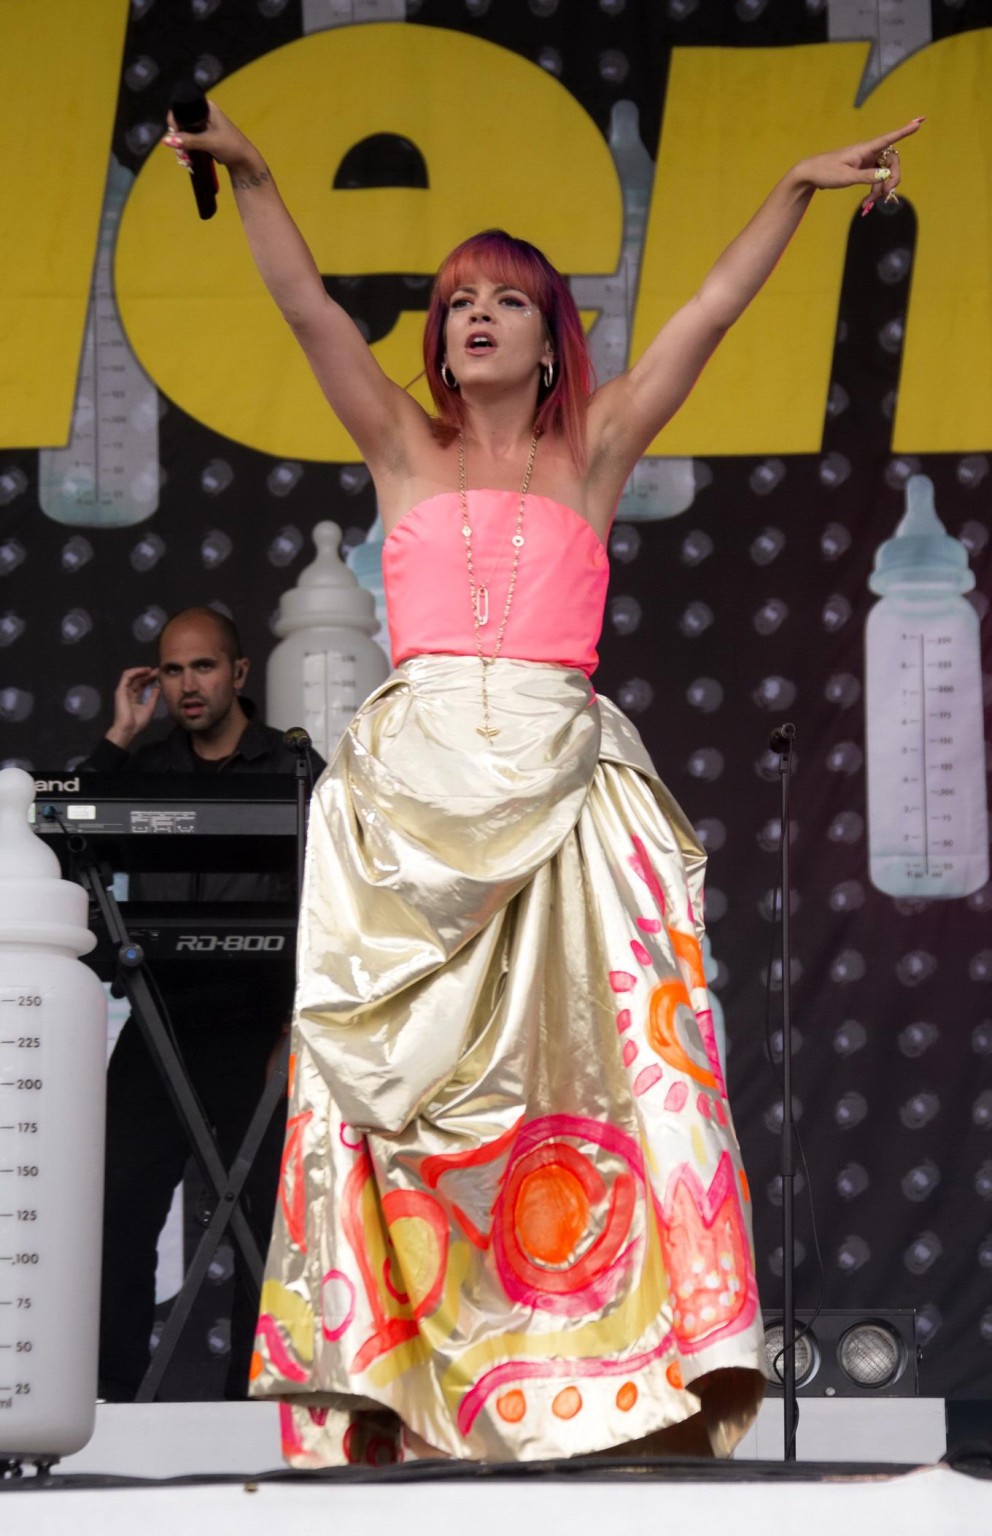 Lily Allen flashing her pink panties on stage at the Glastonbury Festival #75192443